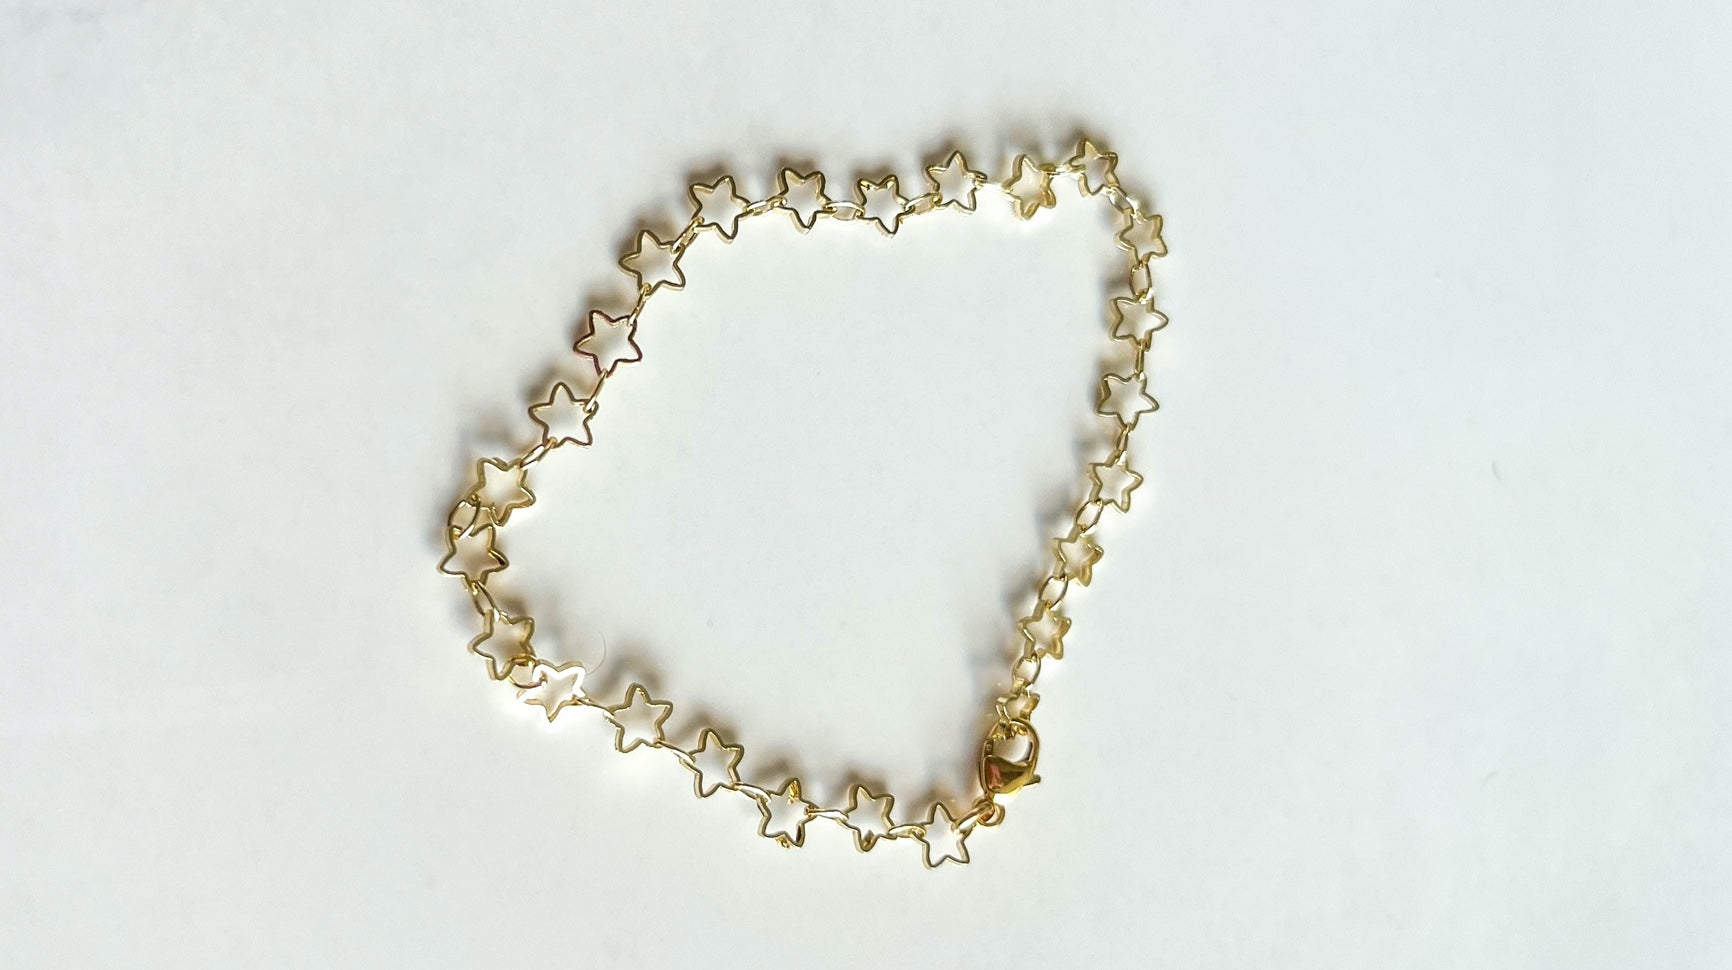 14K Gold Filled Bracelet Charms And Connectors, 19 Style Options